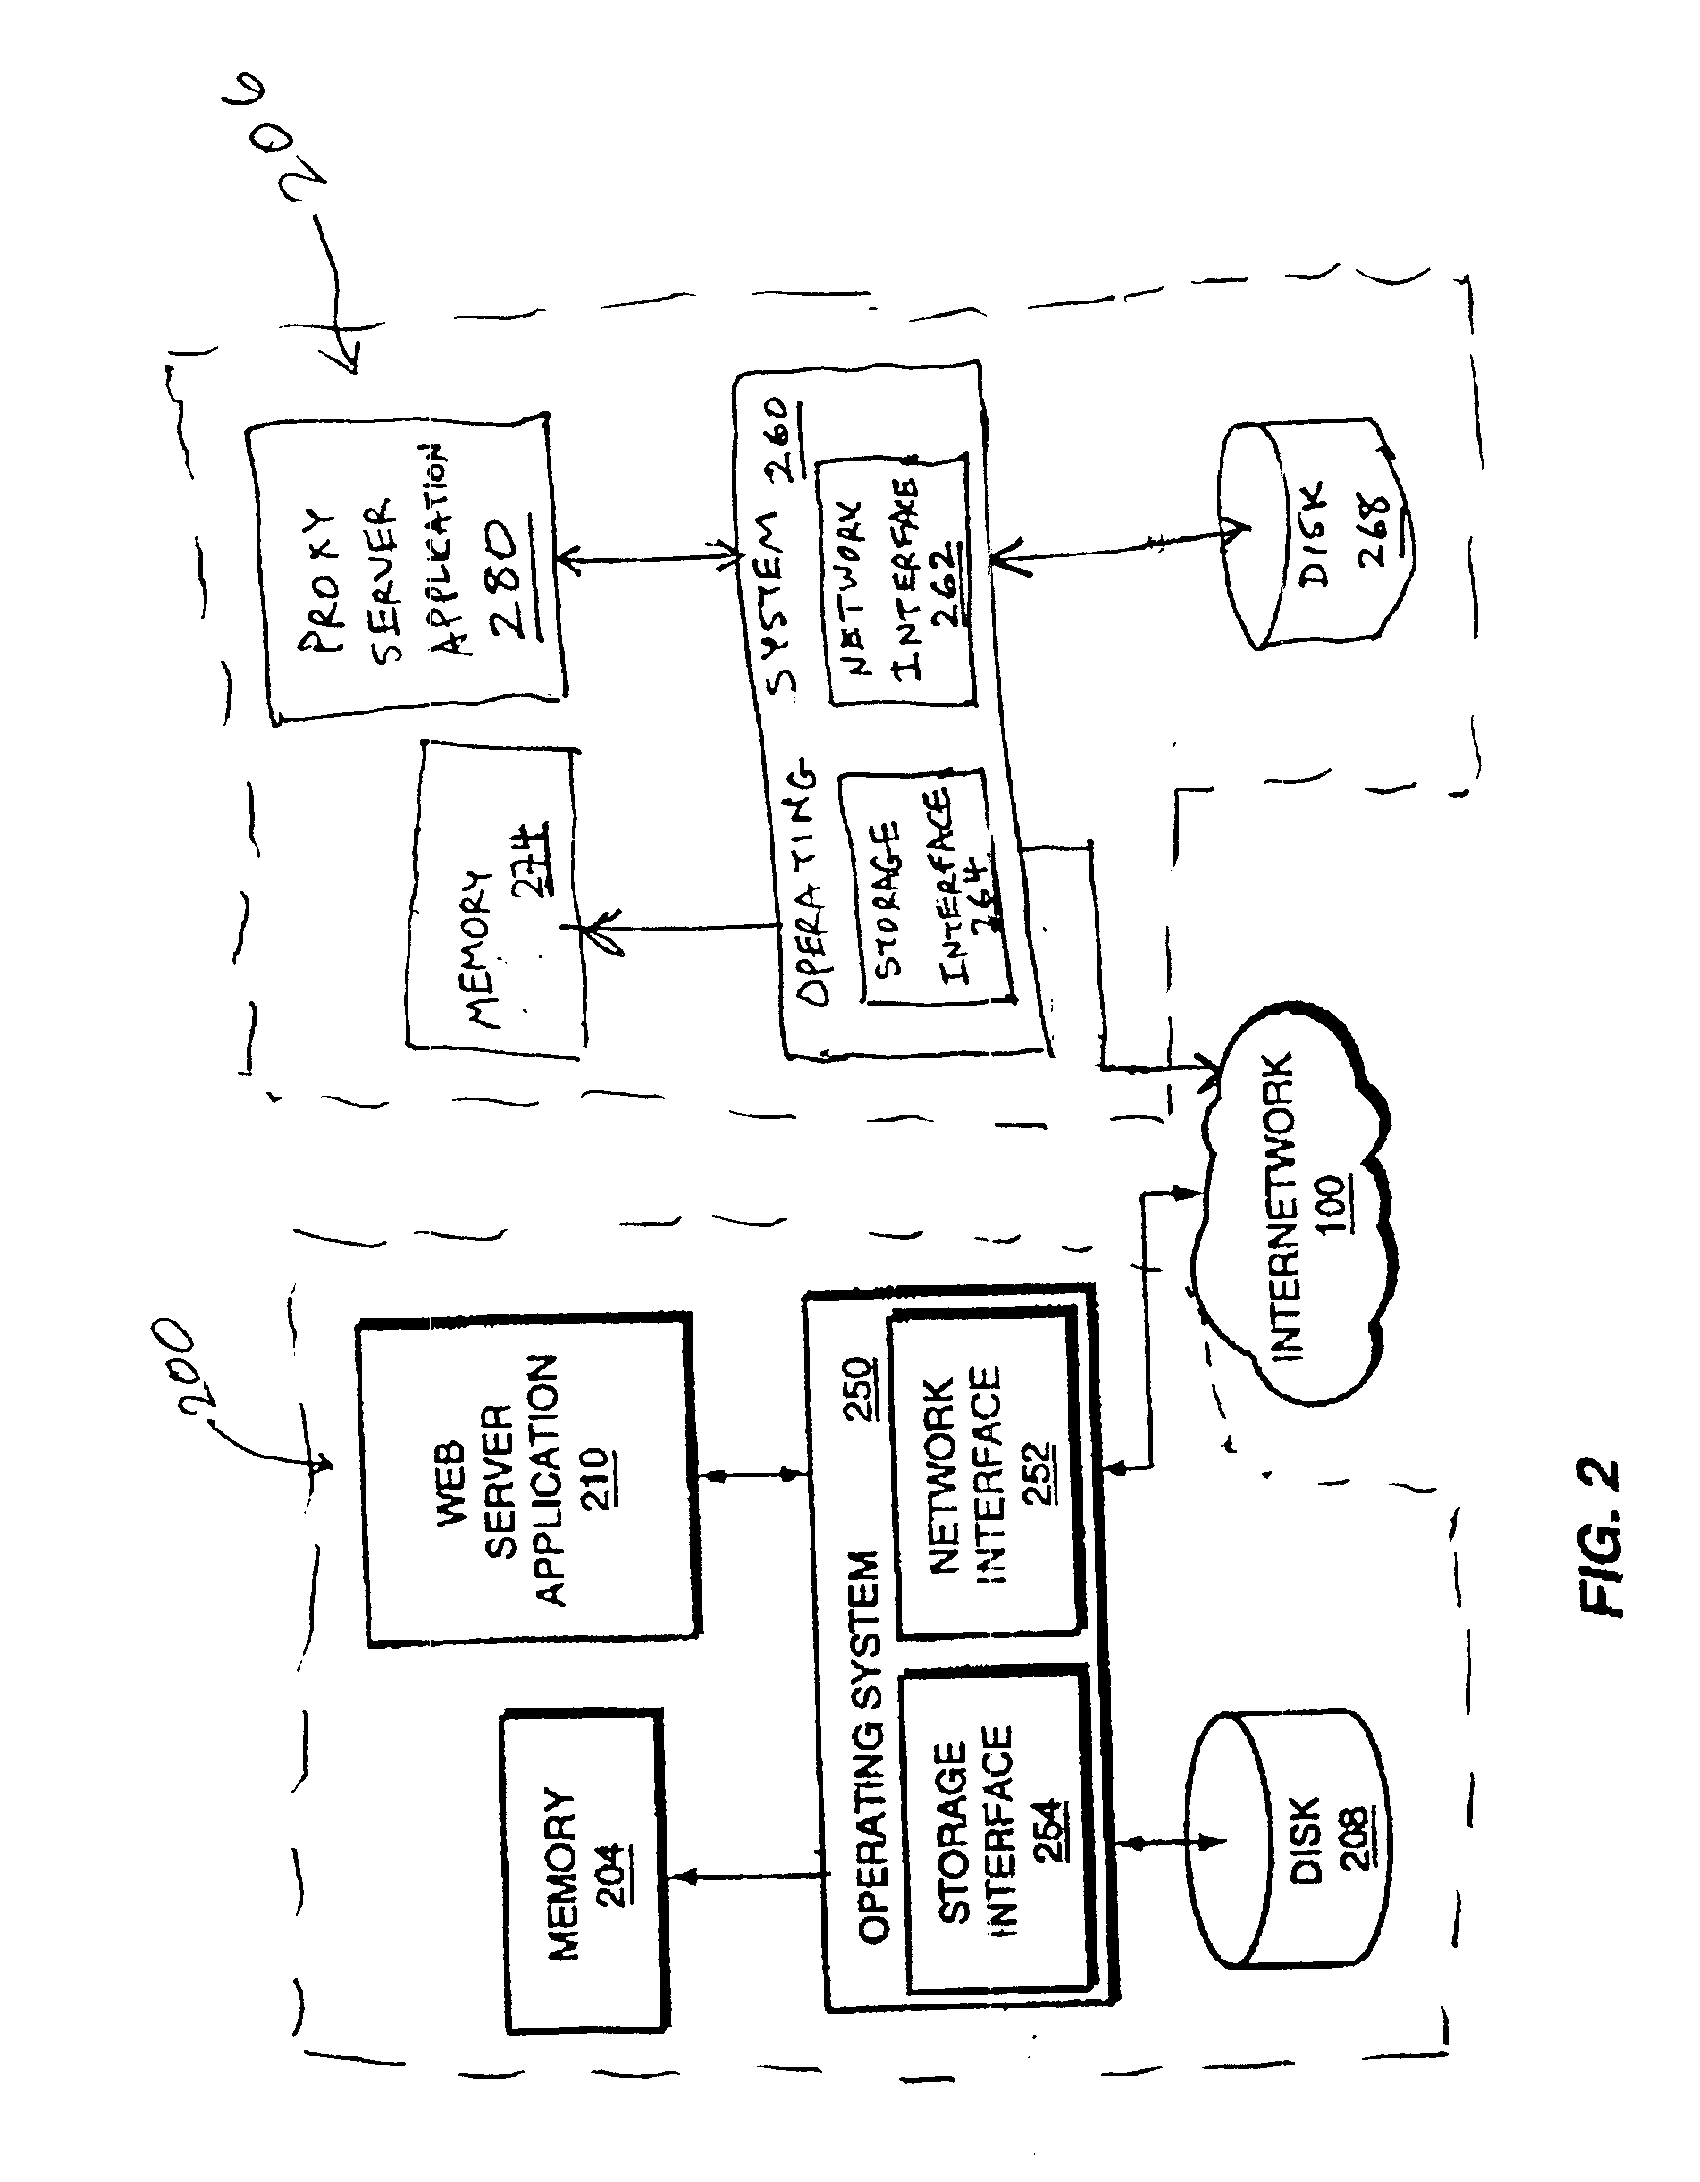 System and method for partitioning address space in a proxy cache server cluster